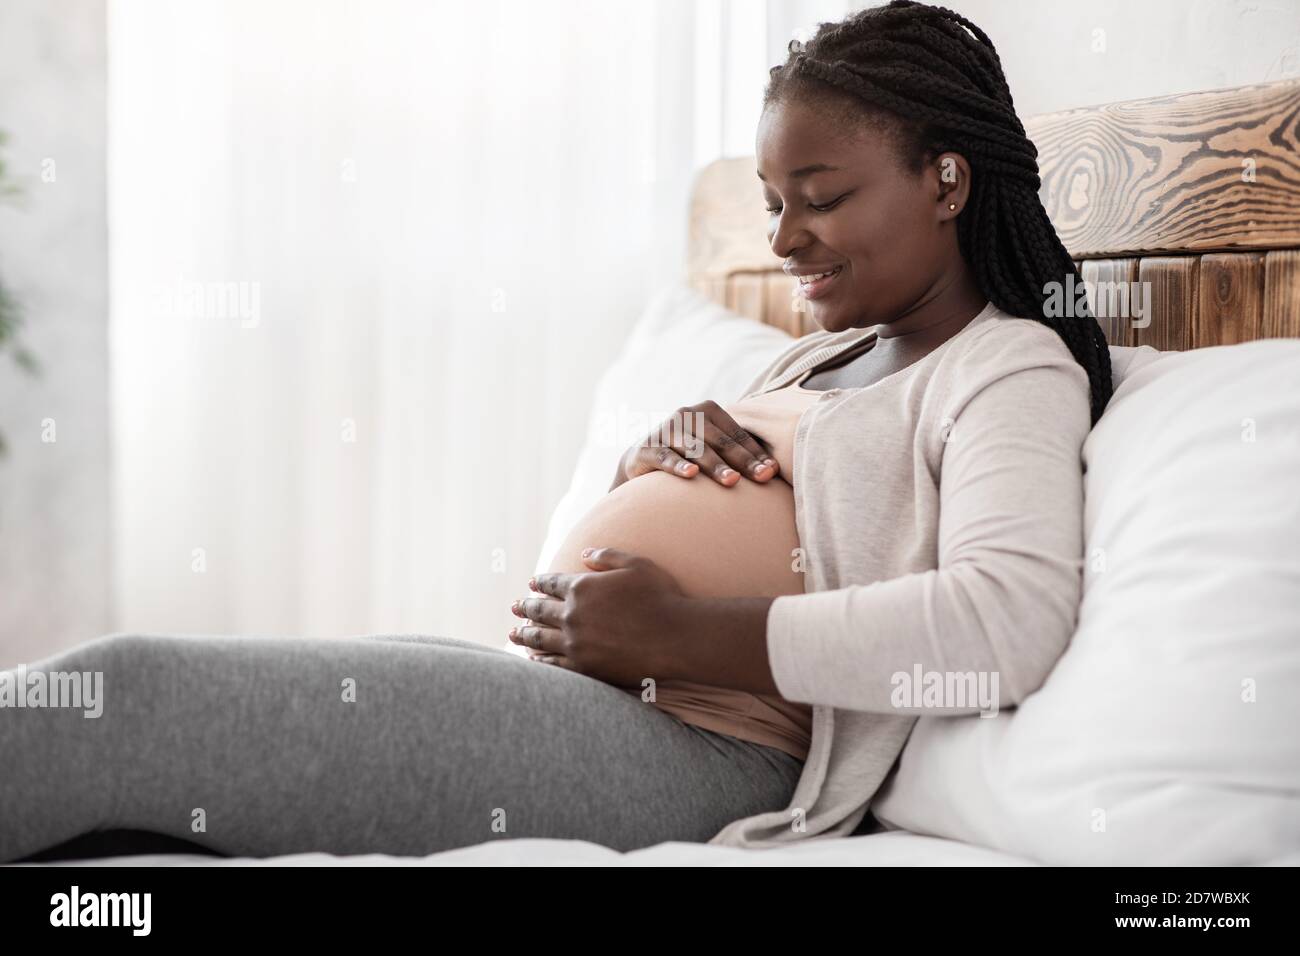 Desirable Pregnancy. Black Pregnant Woman Relaxing On Bed At Home, Touching Belly Stock Photo